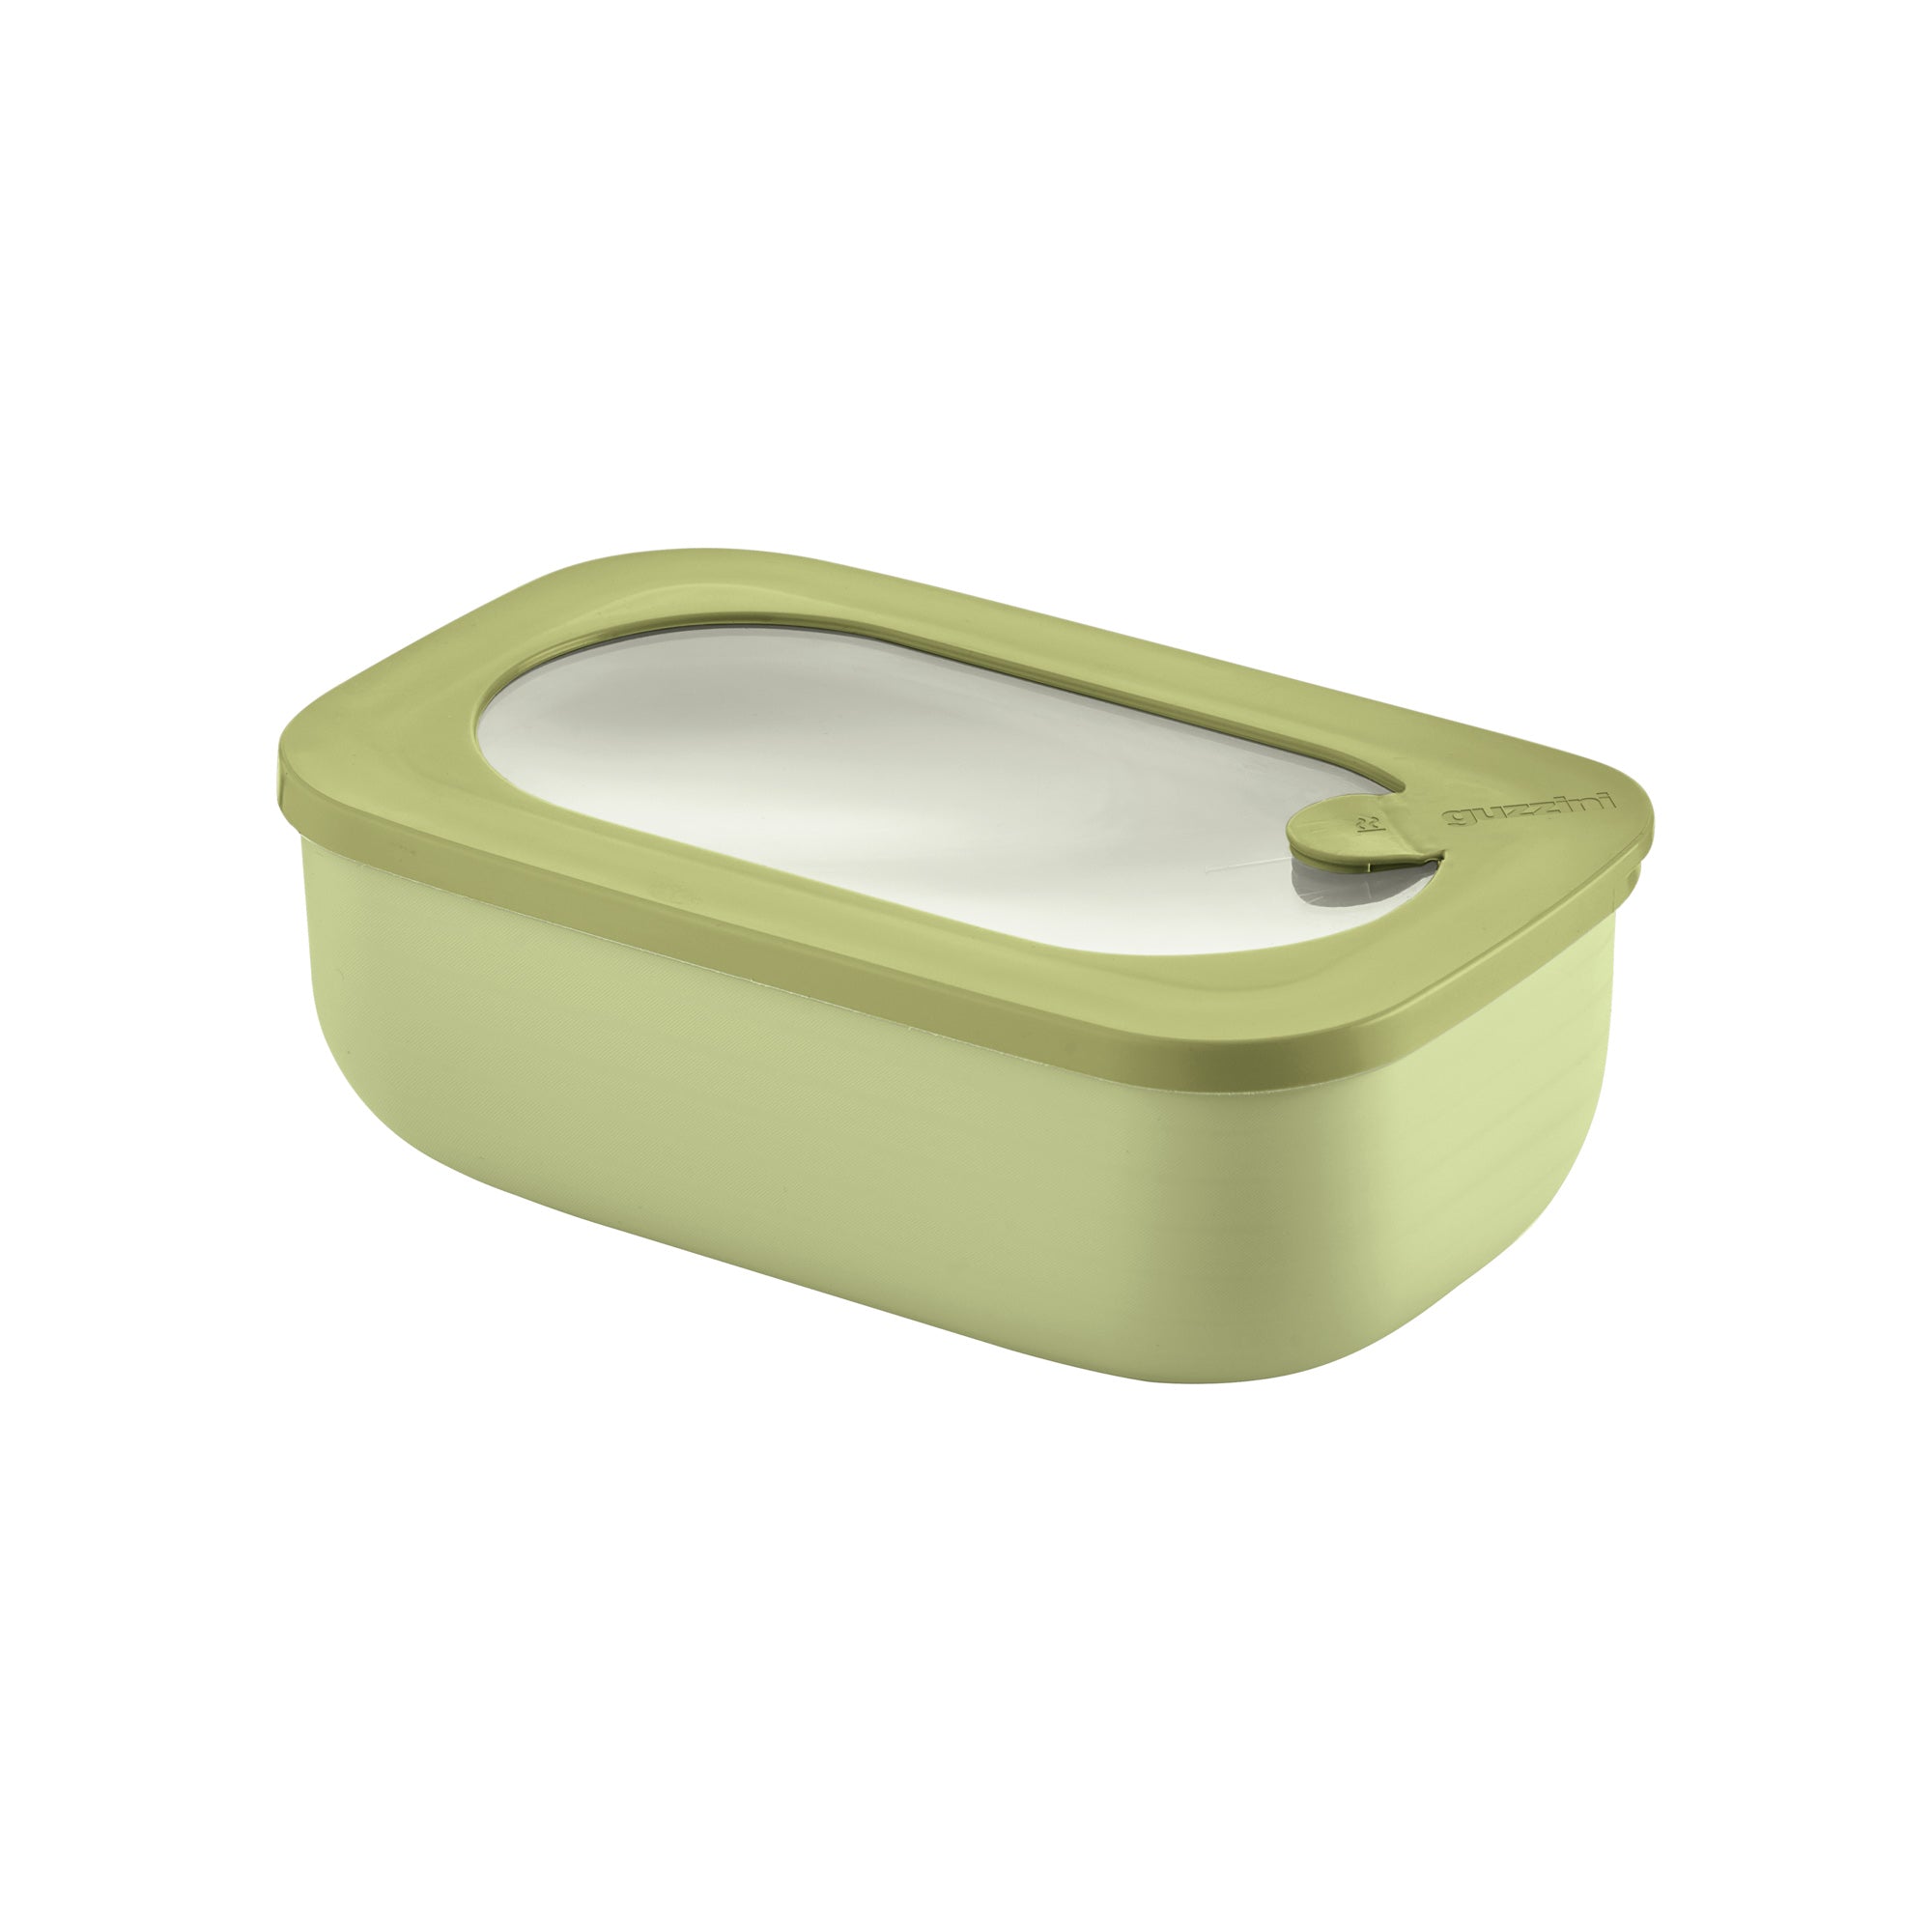 SHALLOW CONTAINER (ISCC+) 'STORE&MORE BIO' "FOOD STORAGE"